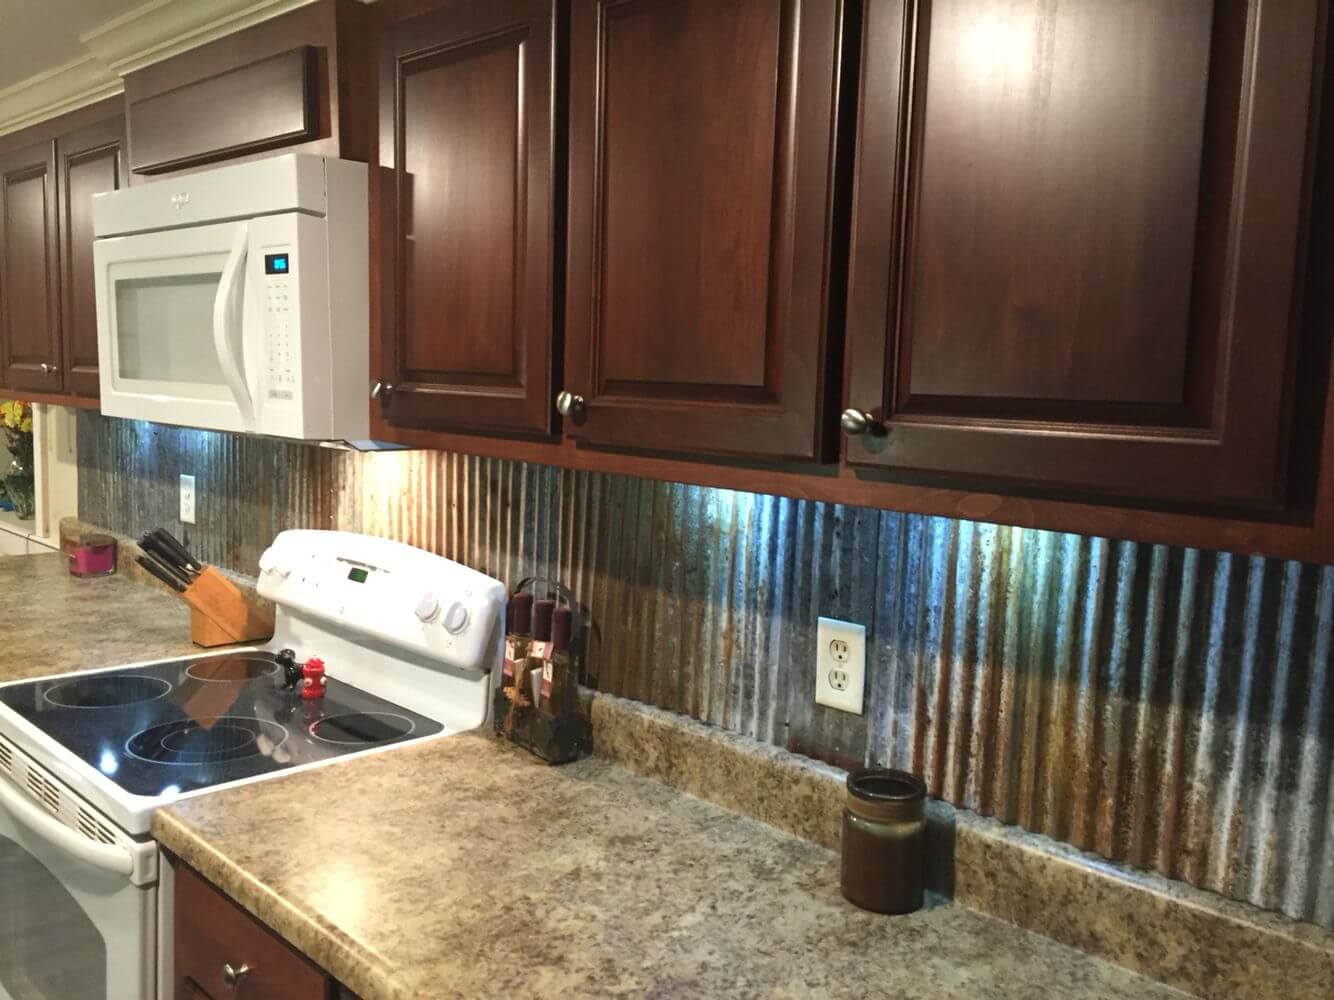 Kitchen cabinet fittings made of wood